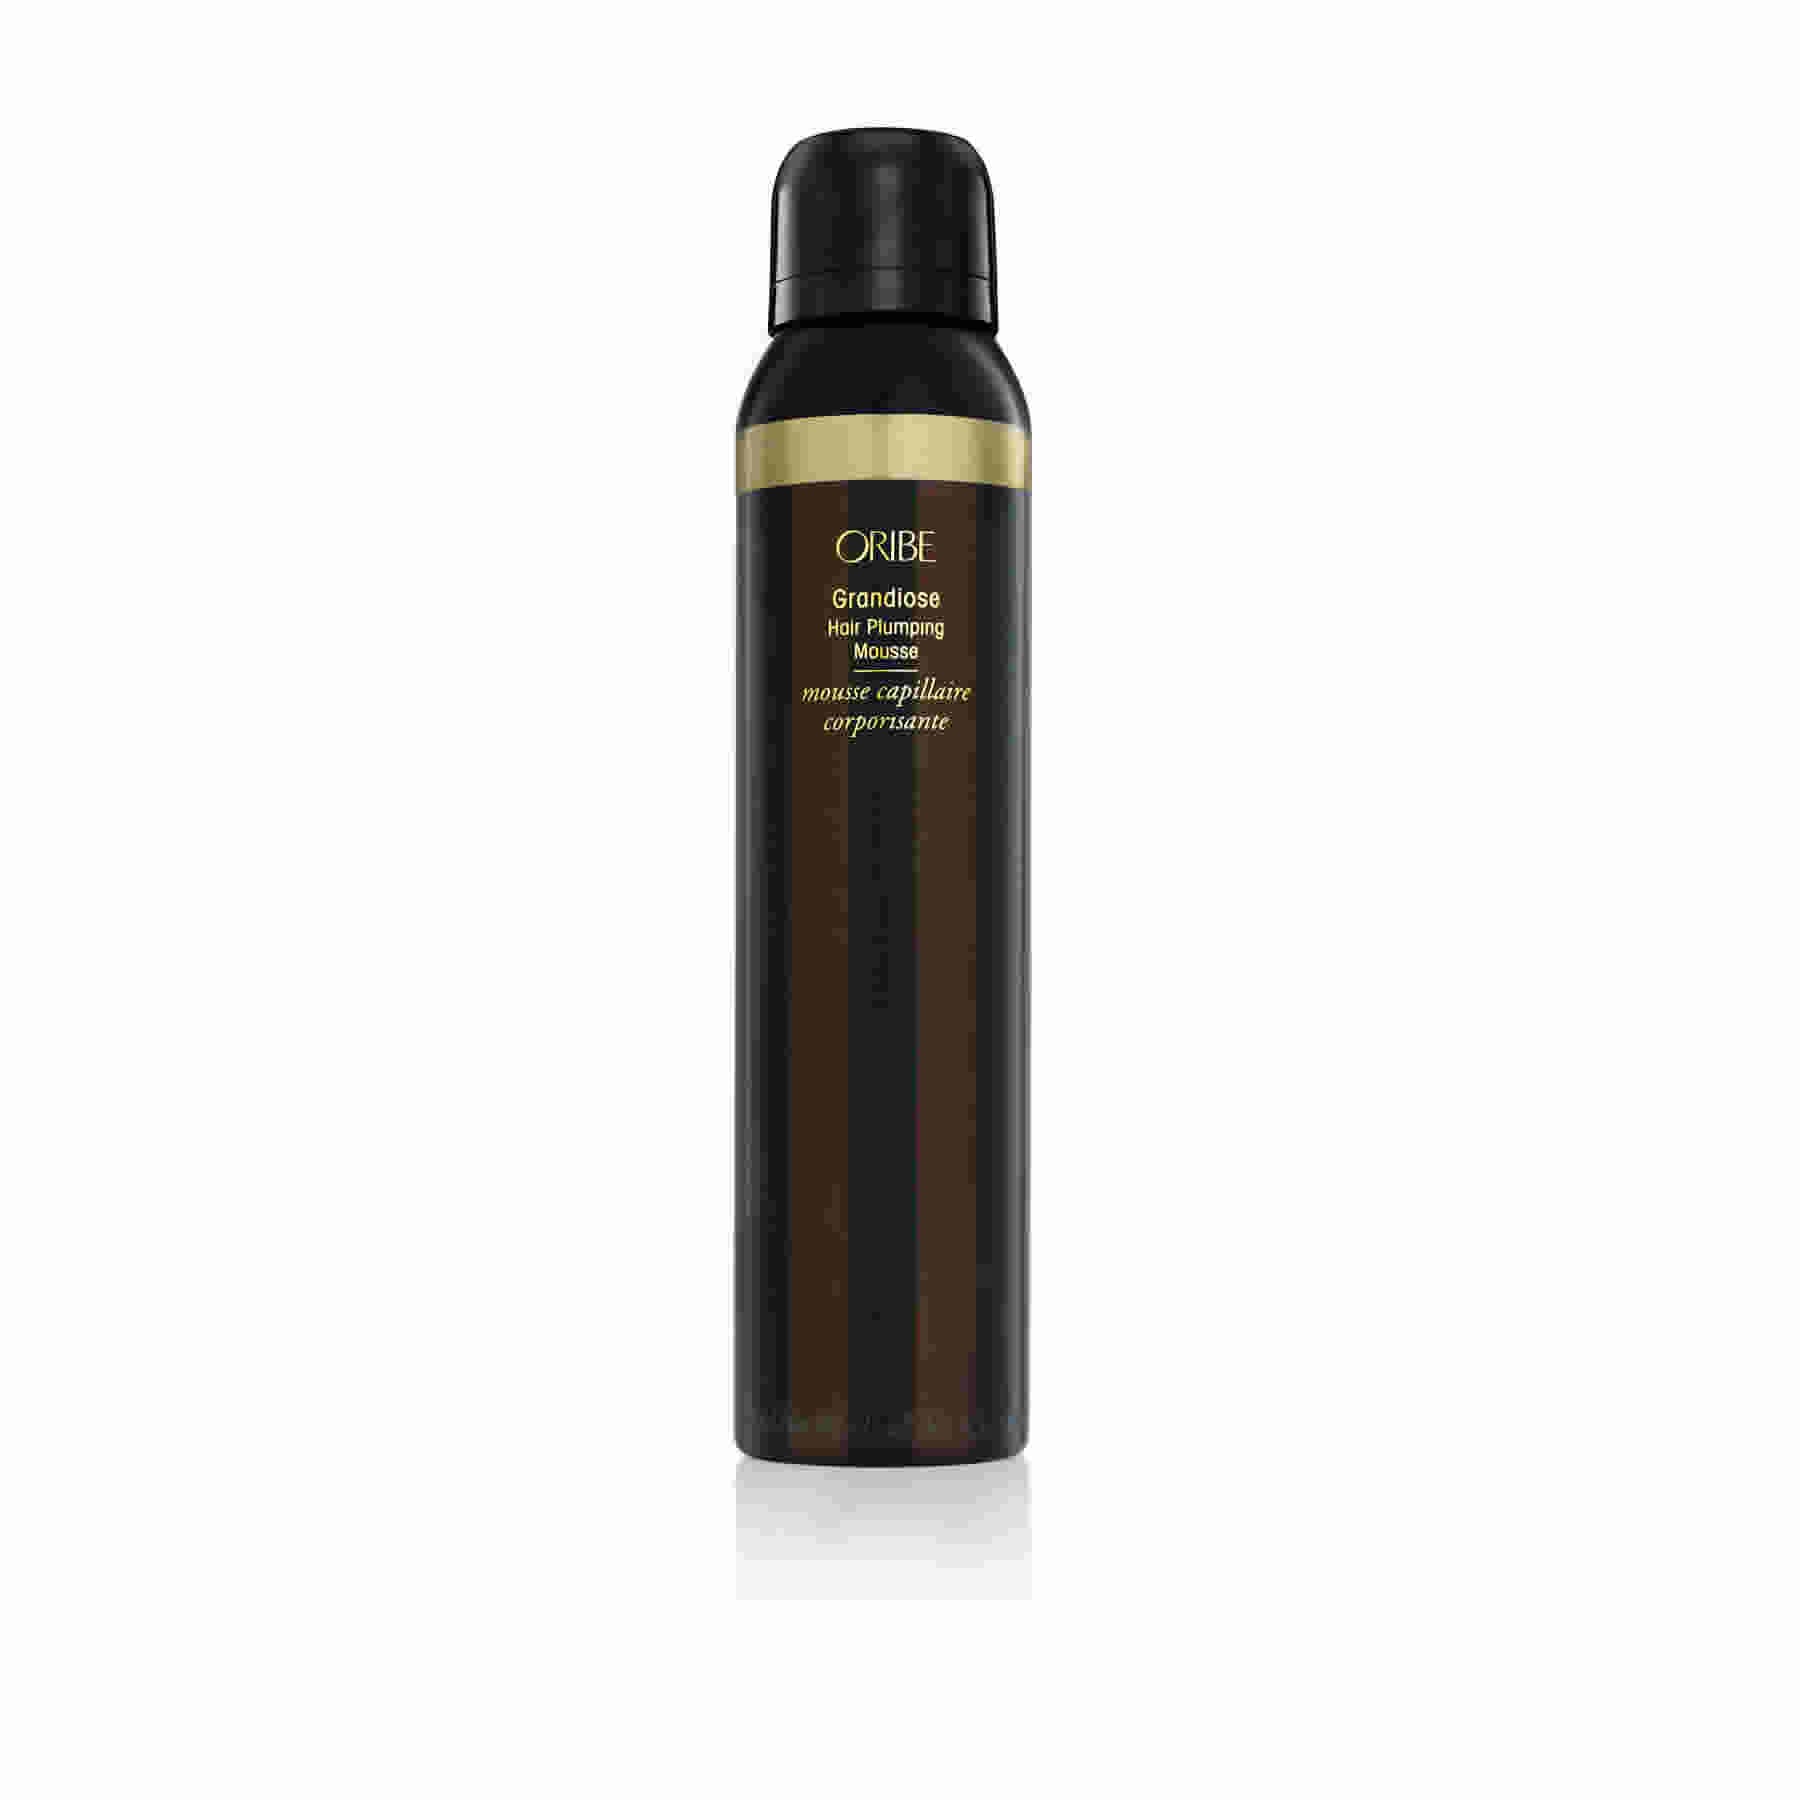 Grandiose Hair Plumping Mousse by Oribe